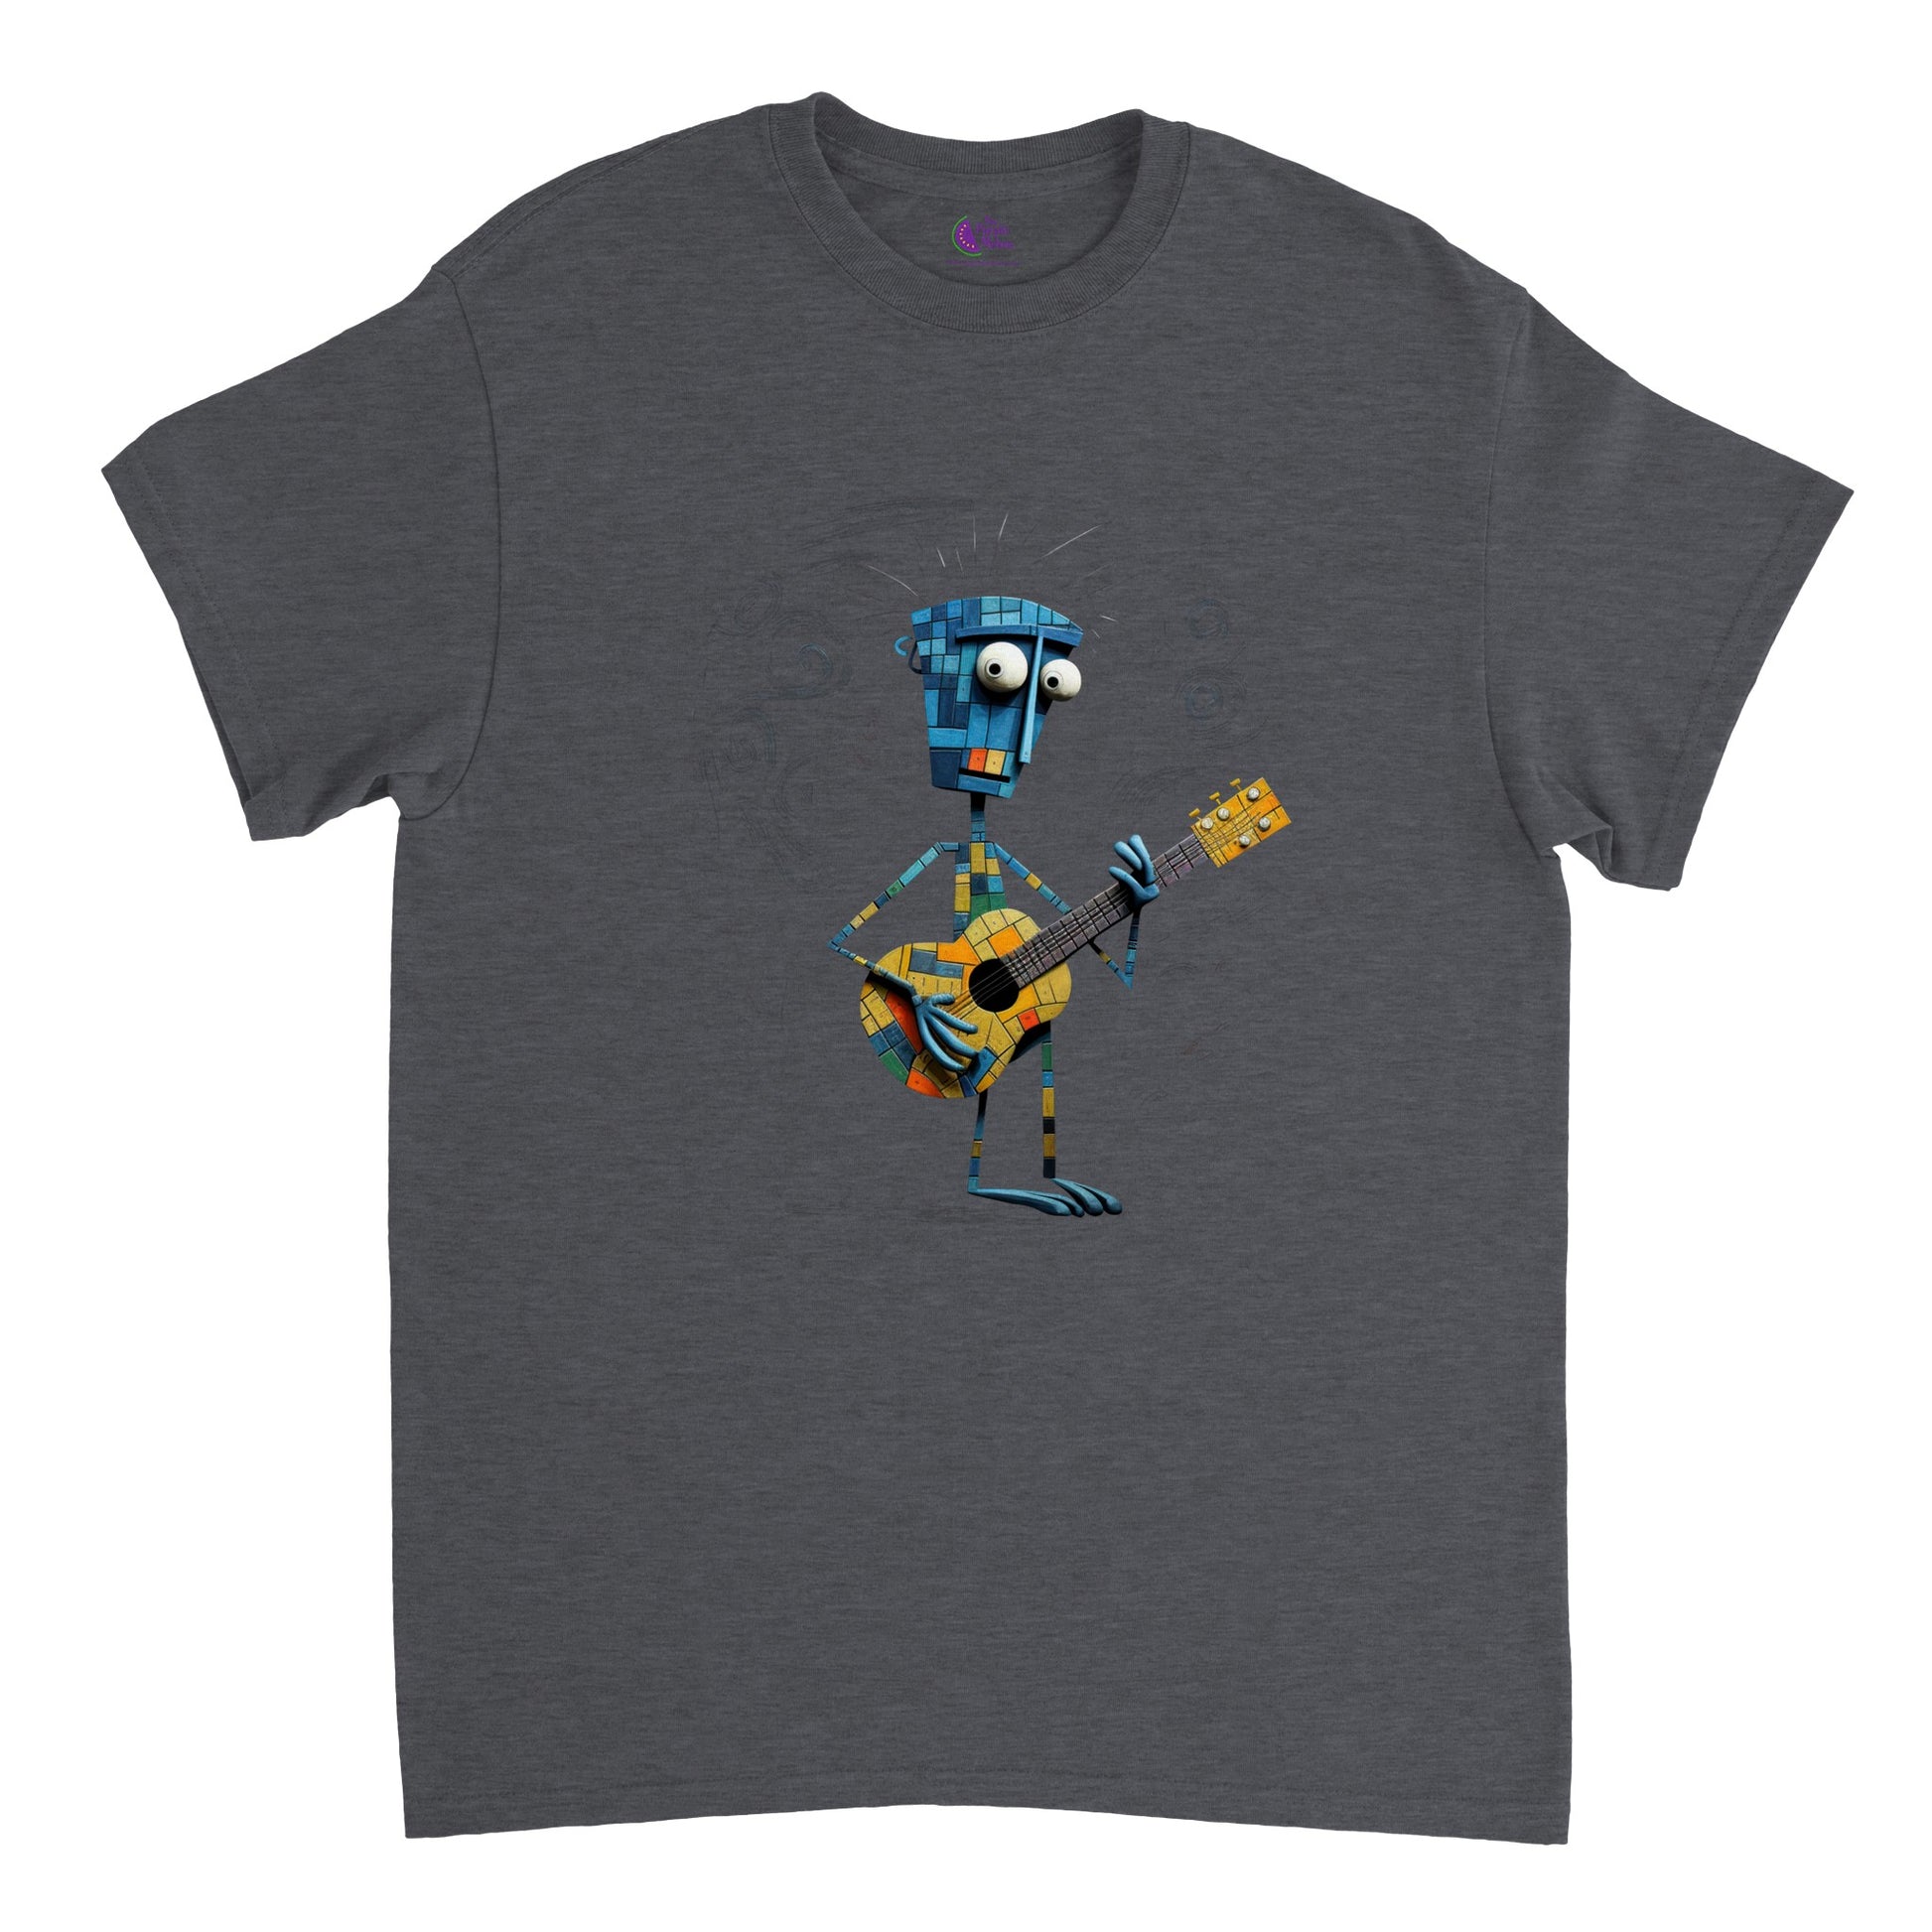 dark heather t-shirt with an abstract character playing guitar print